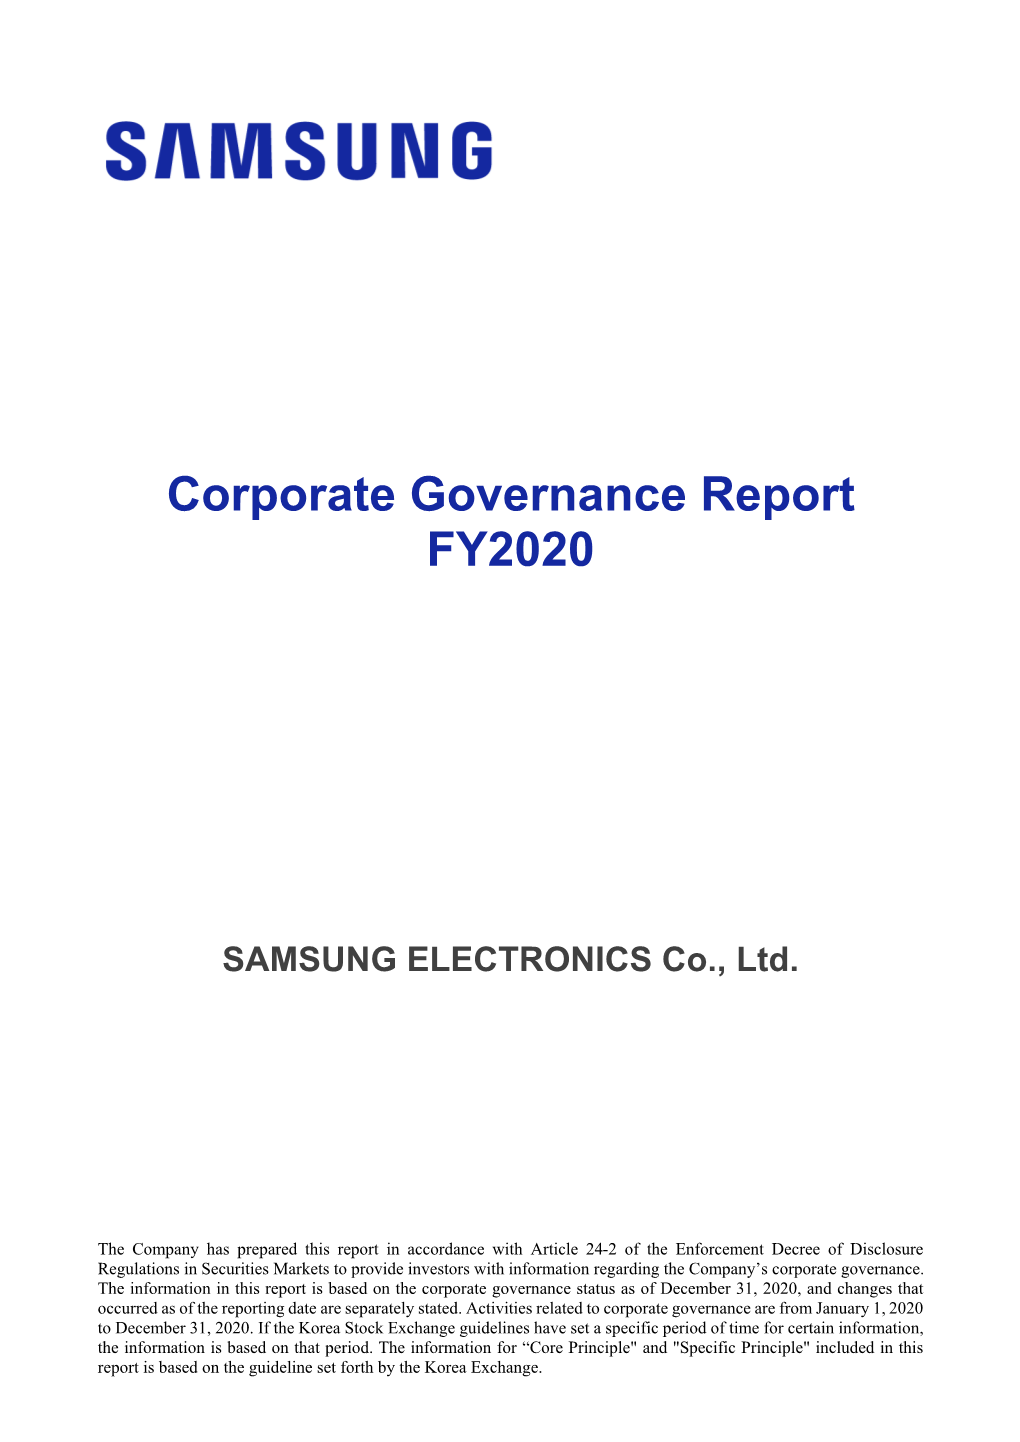 Corporate Governance Report FY2020